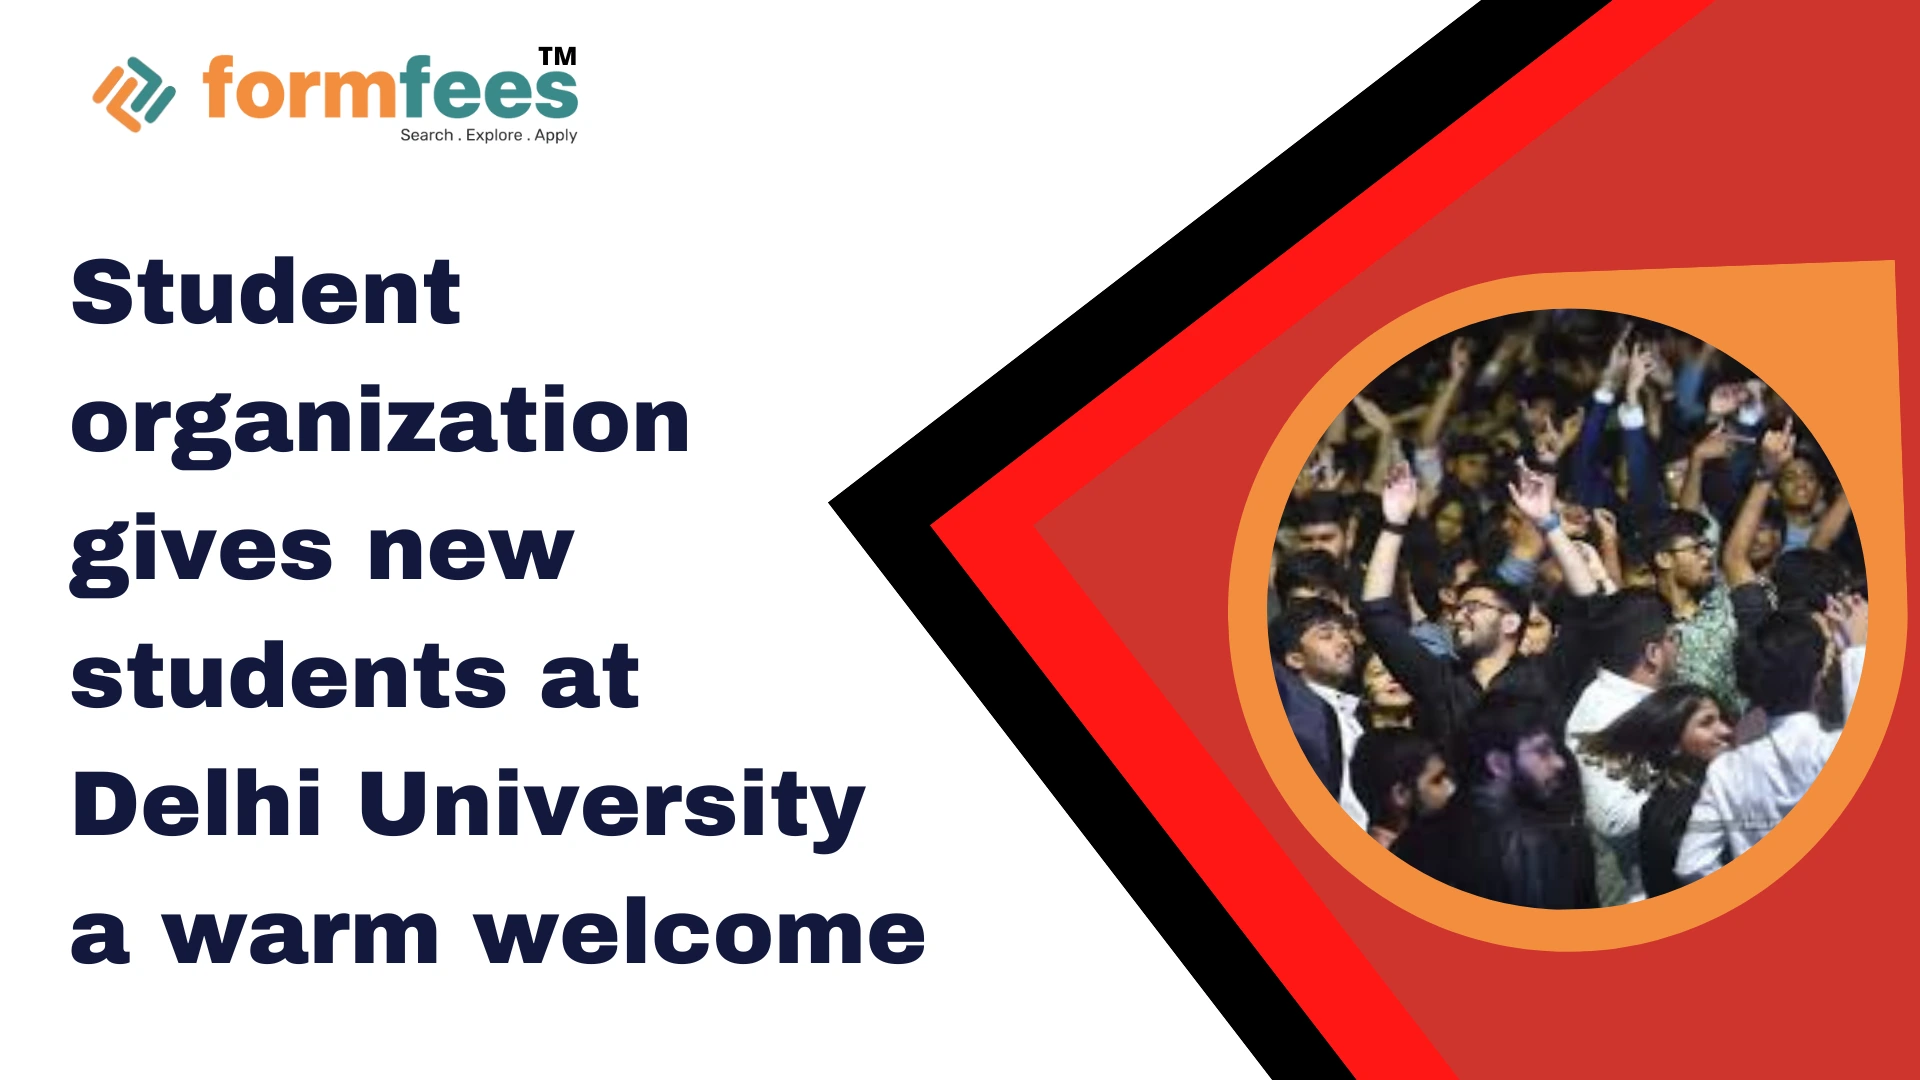 Student organization gives new students at Delhi University a warm welcome (2)